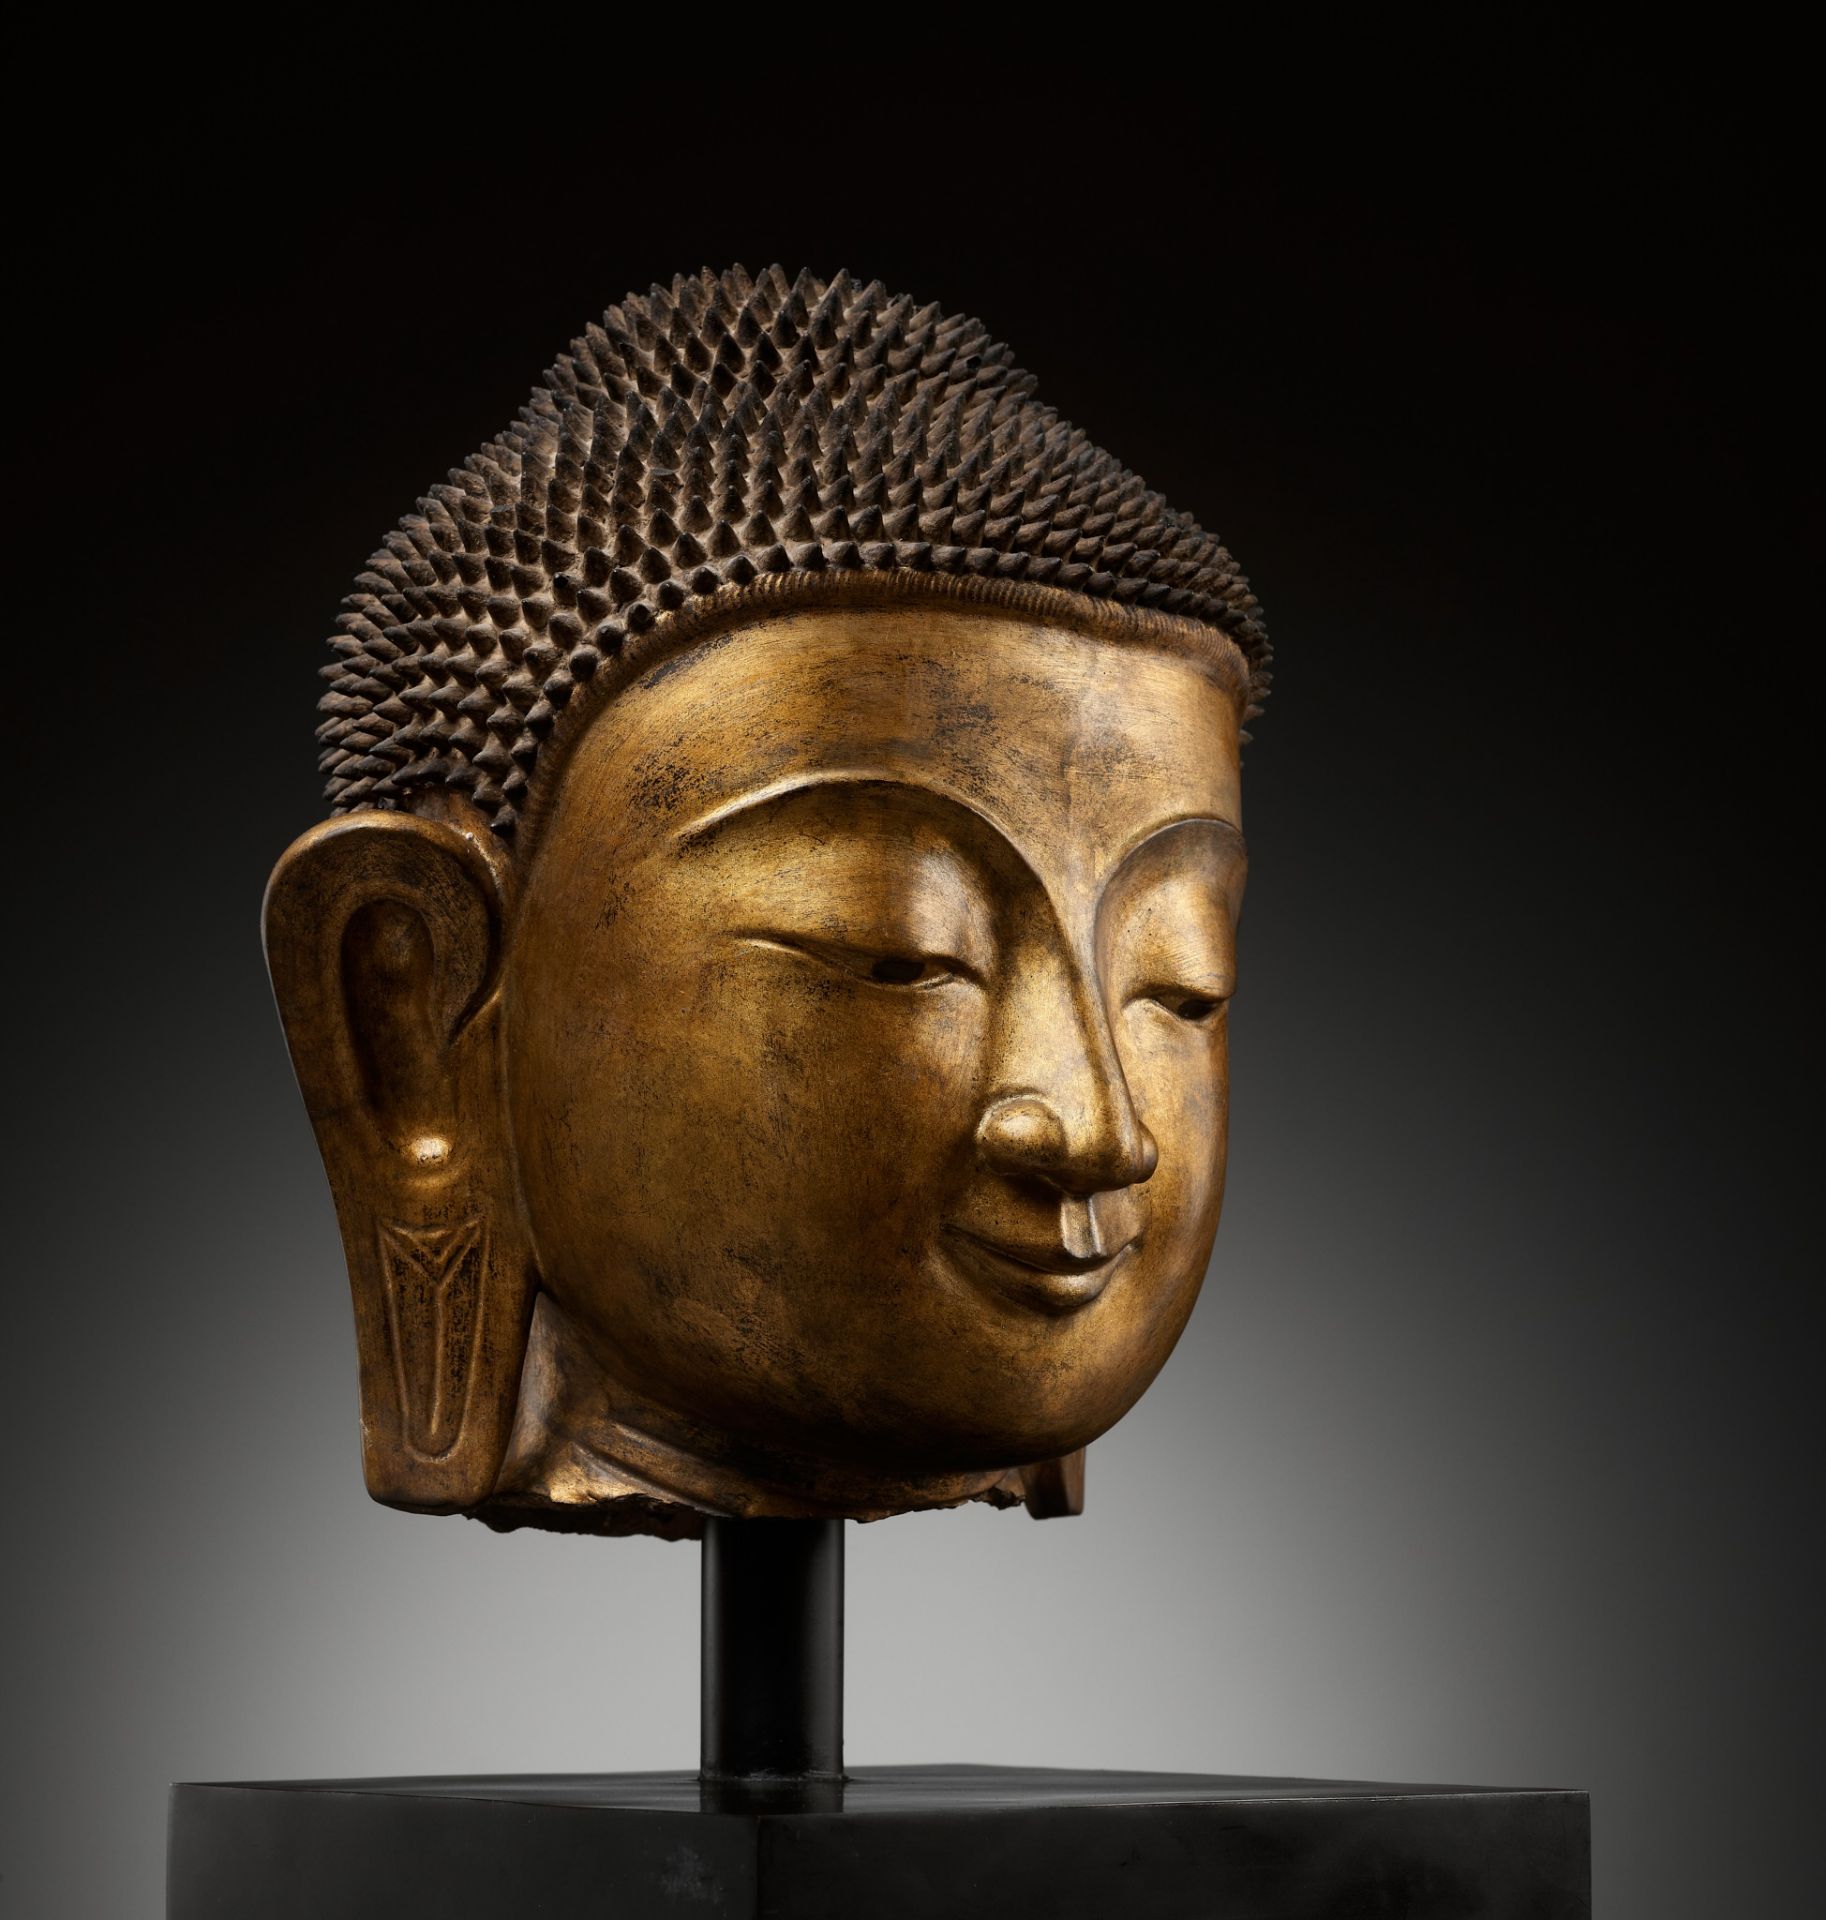 A LARGE GILT DRY LACQUER HEAD OF BUDDHA, SHAN STYLE, BURMA, 19TH CENTURY